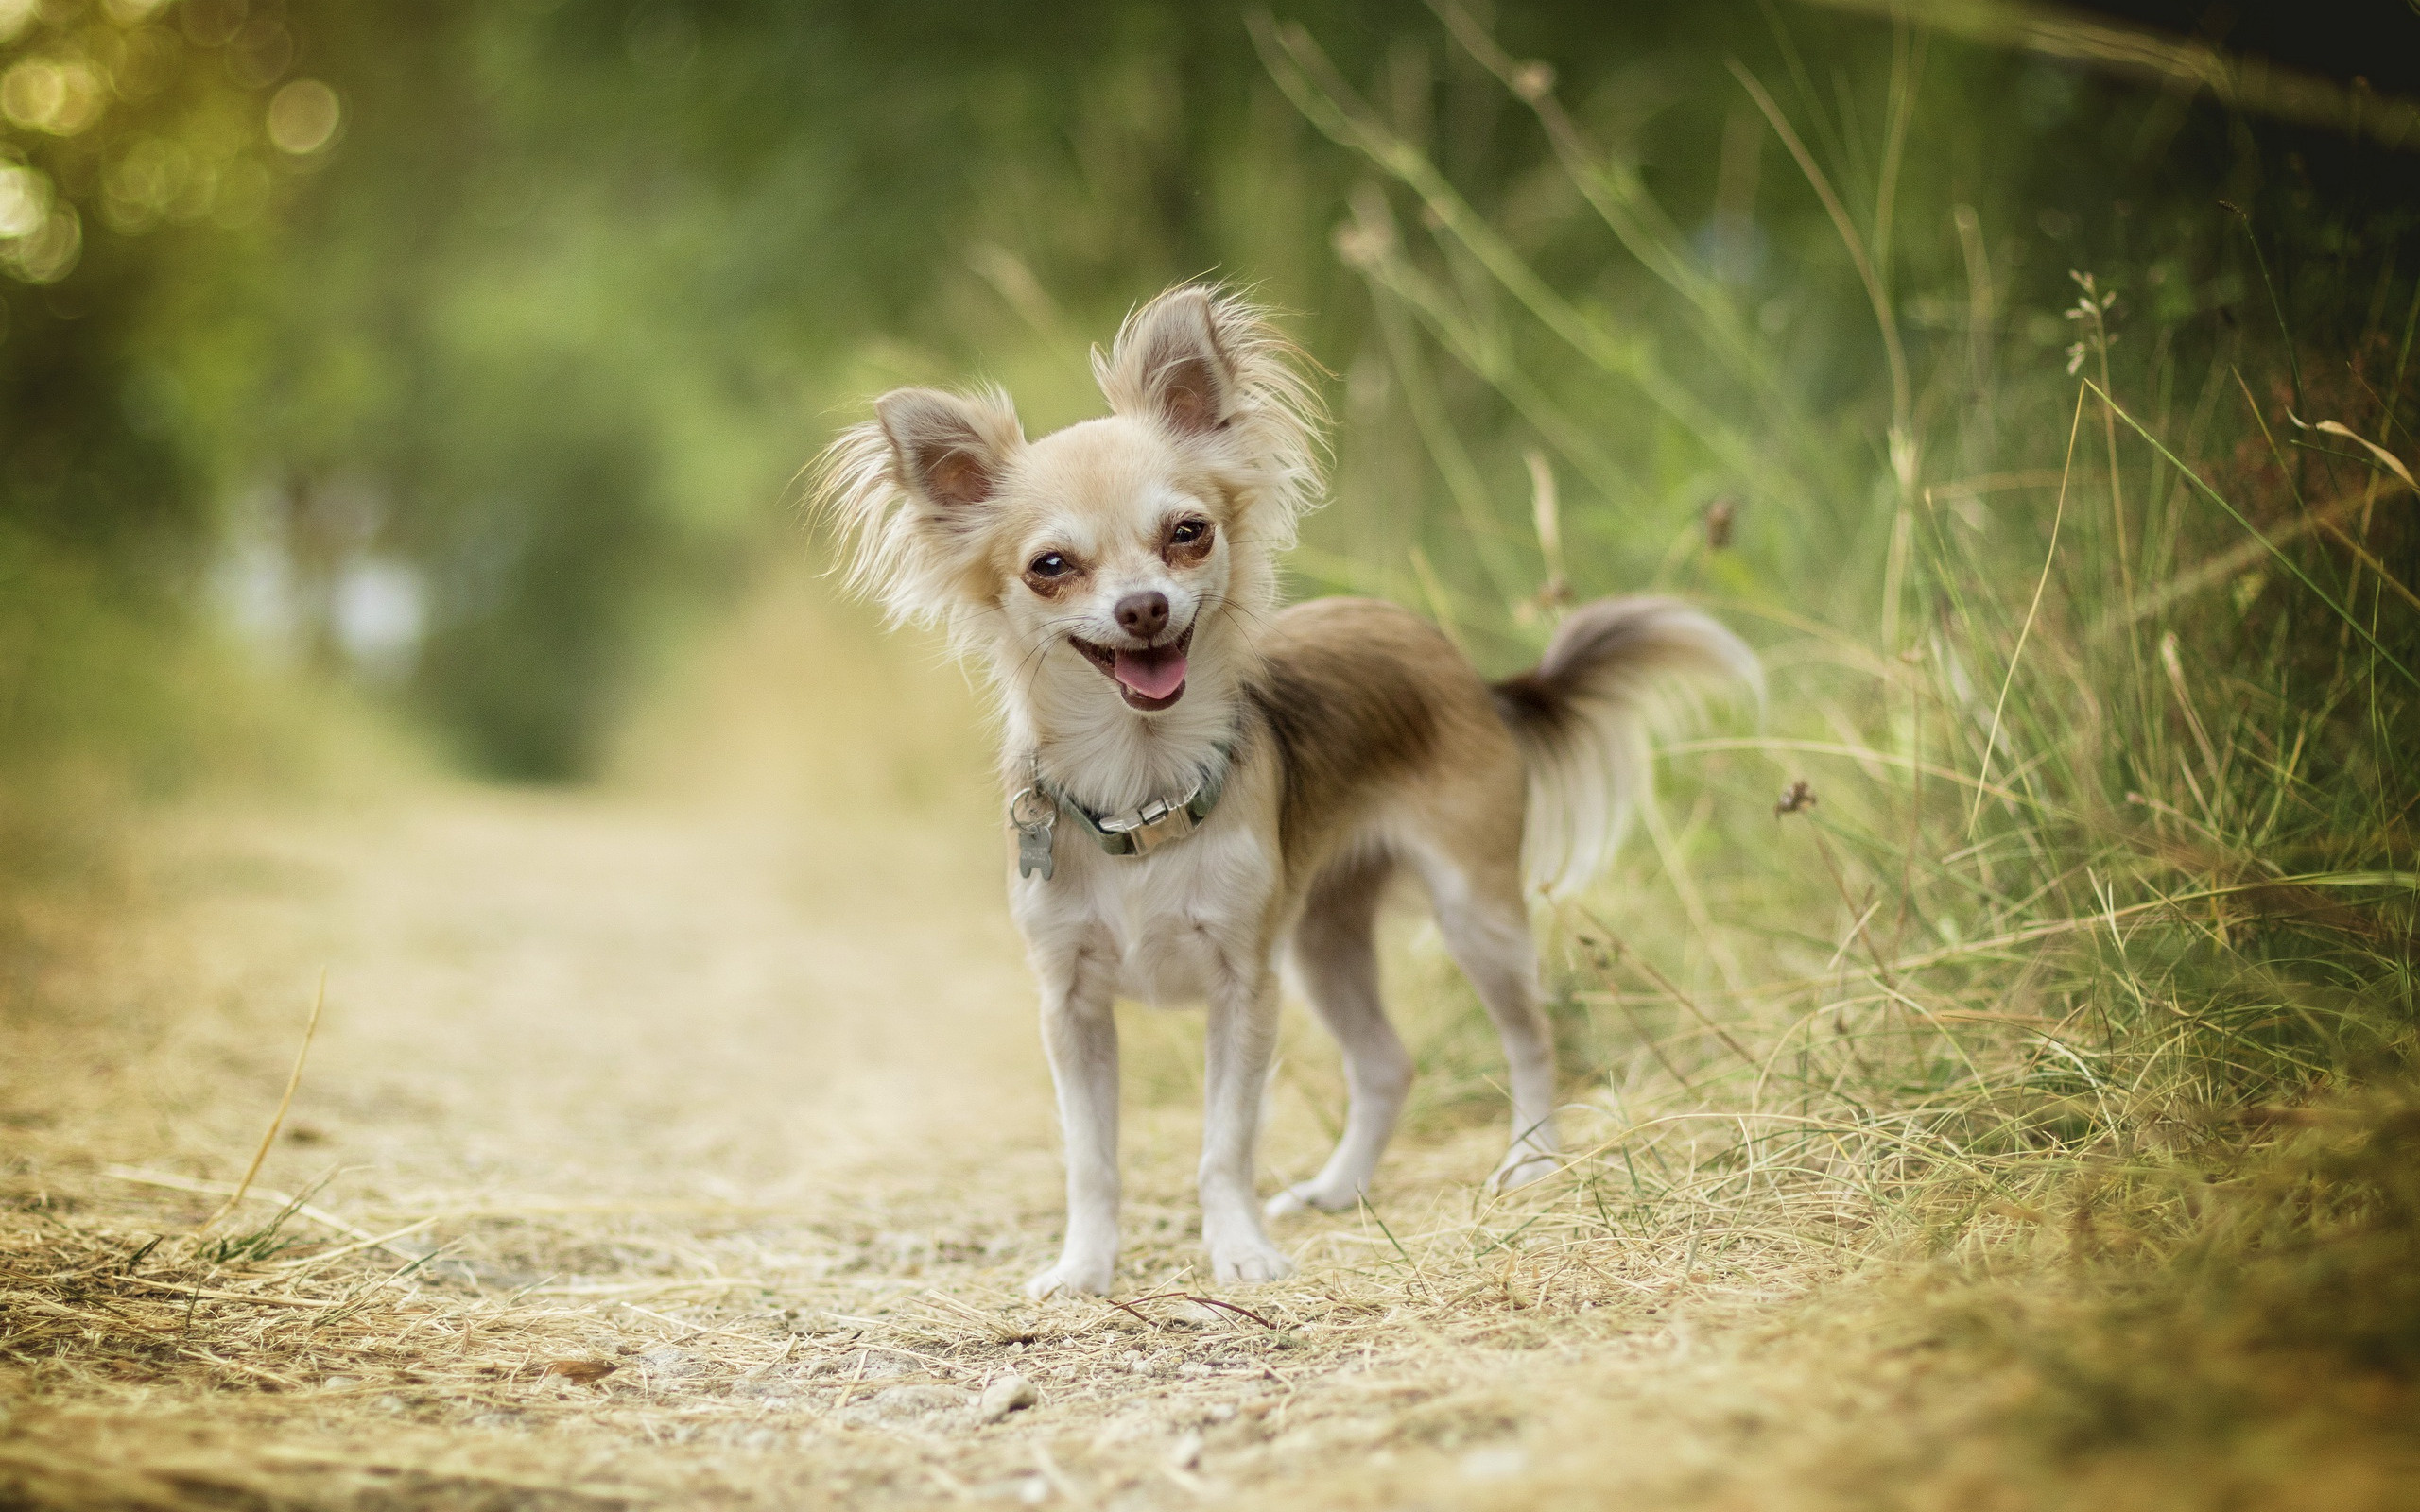 Chihuahua in forest, Cute and small, Lovely pet, Picturesque scenery, 2560x1600 HD Desktop